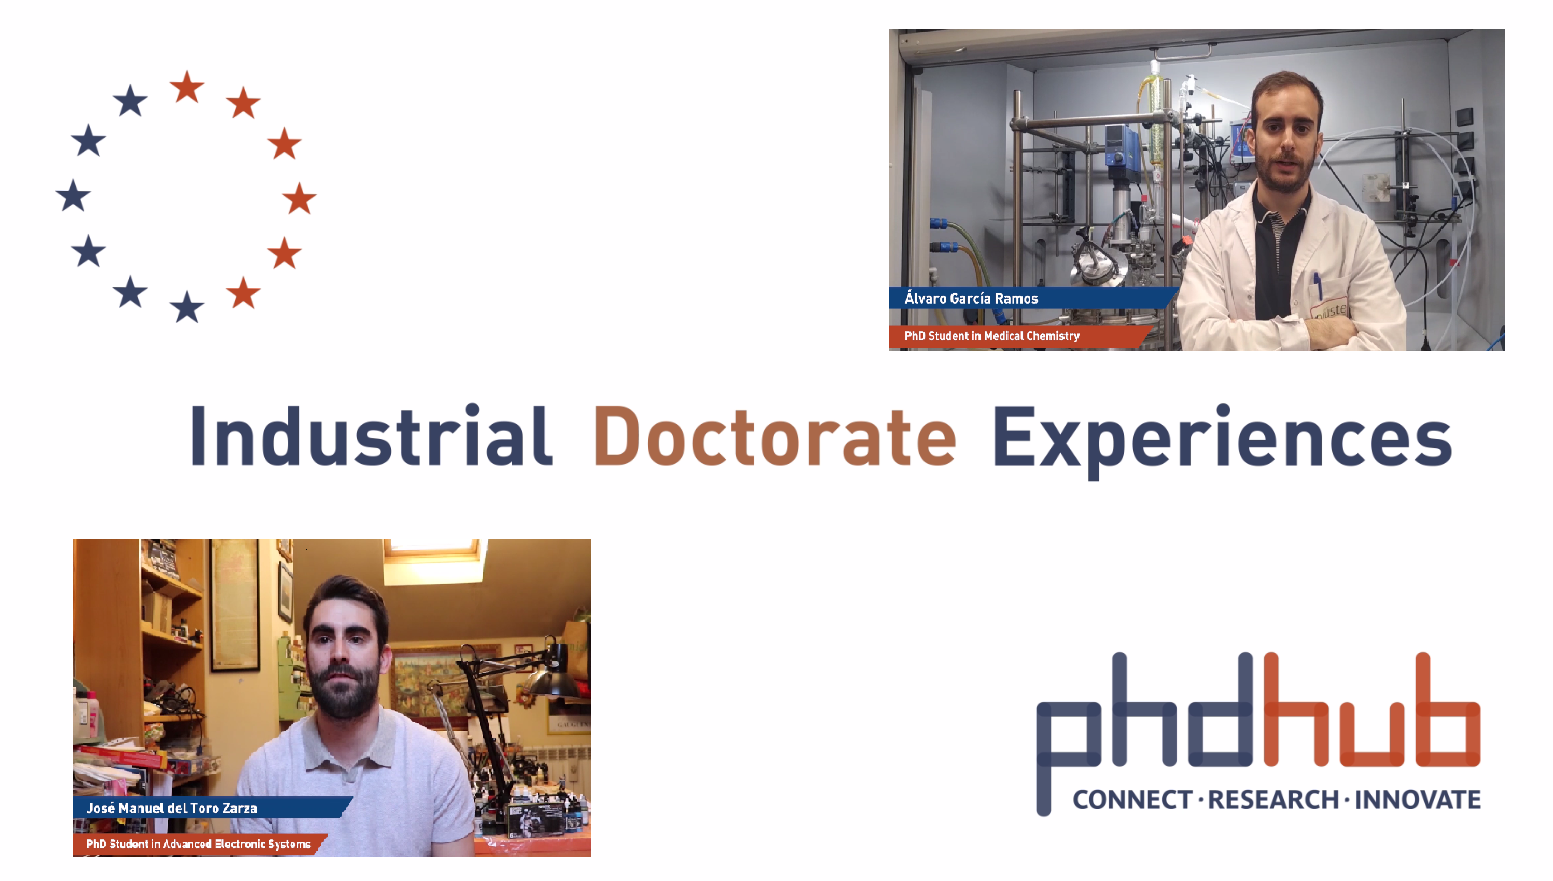 Industrial Doctorate Experiences at Alcala Hub